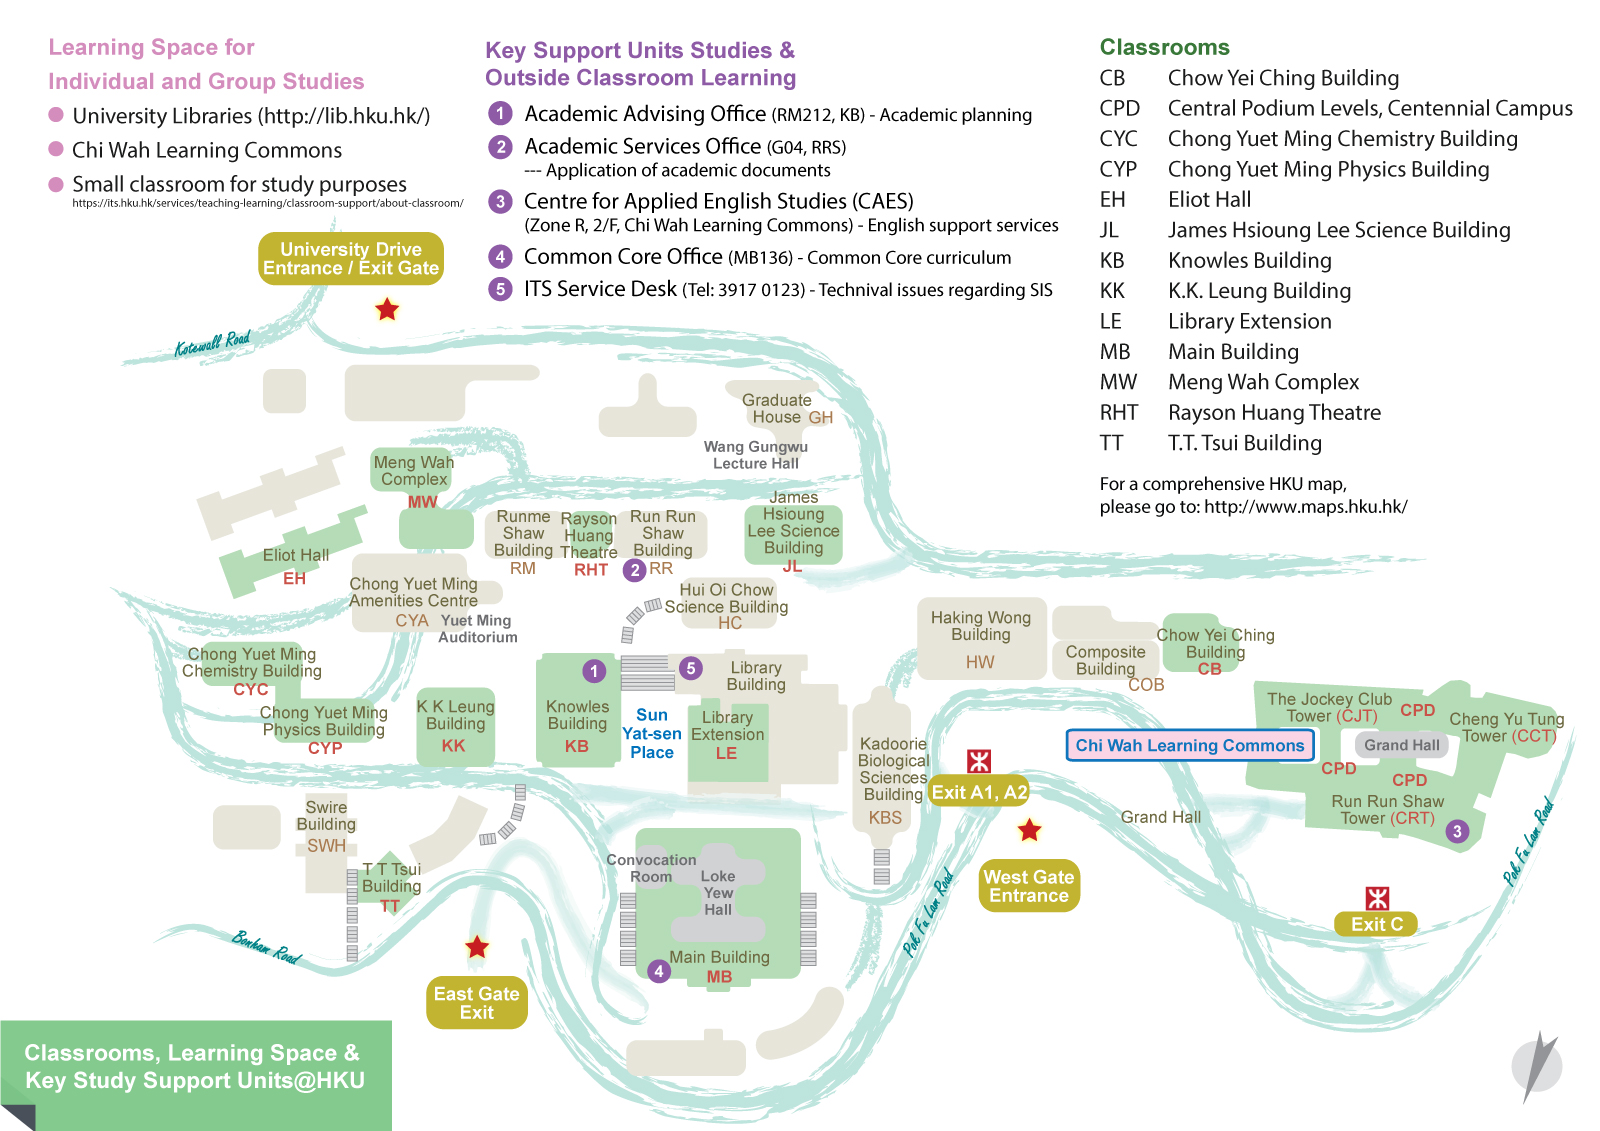 HKU Map - Classrooms, Learning Space & Key Study Support Units @HKU; - Learning Space for Individual and Group Studies; - Key Support Units Studies & Outside Classroom Learning; - Classrooms; - For a comprehensive HKU map, please go to: http://www.maps.hku.hk/